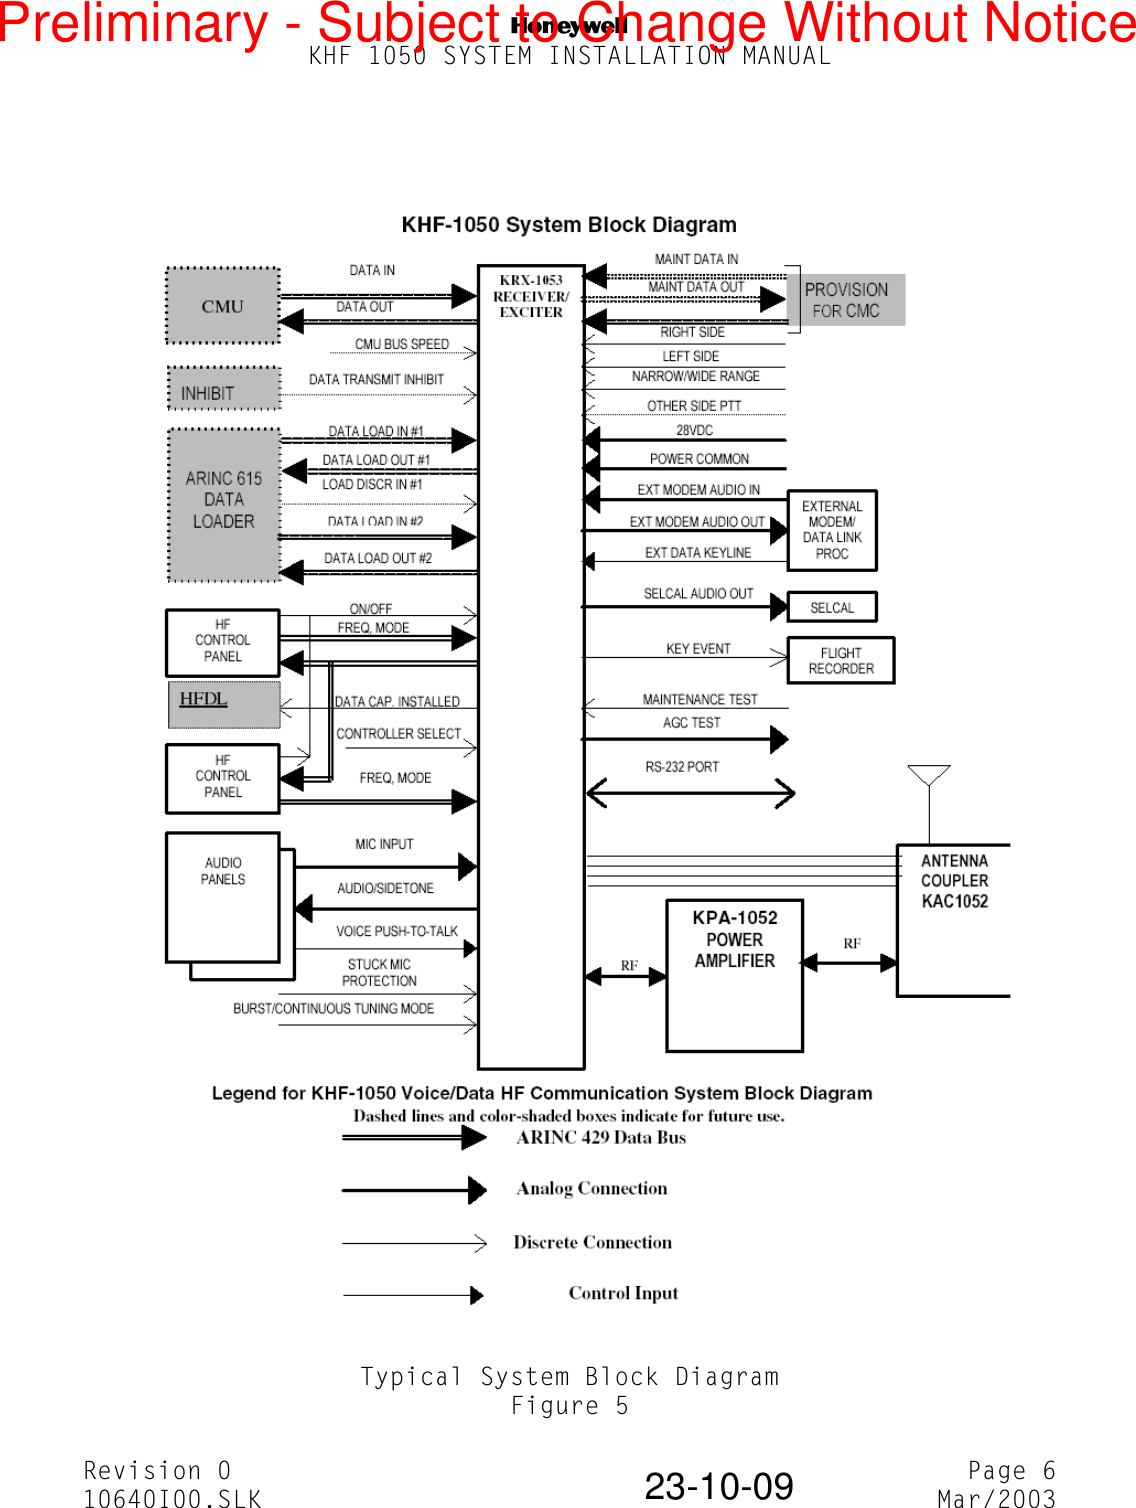 NKHF 1050 SYSTEM INSTALLATION MANUALRevision 0 Page 610640I00.SLK Mar/200323-10-09Typical System Block DiagramFigure 5Preliminary - Subject to Change Without Notice